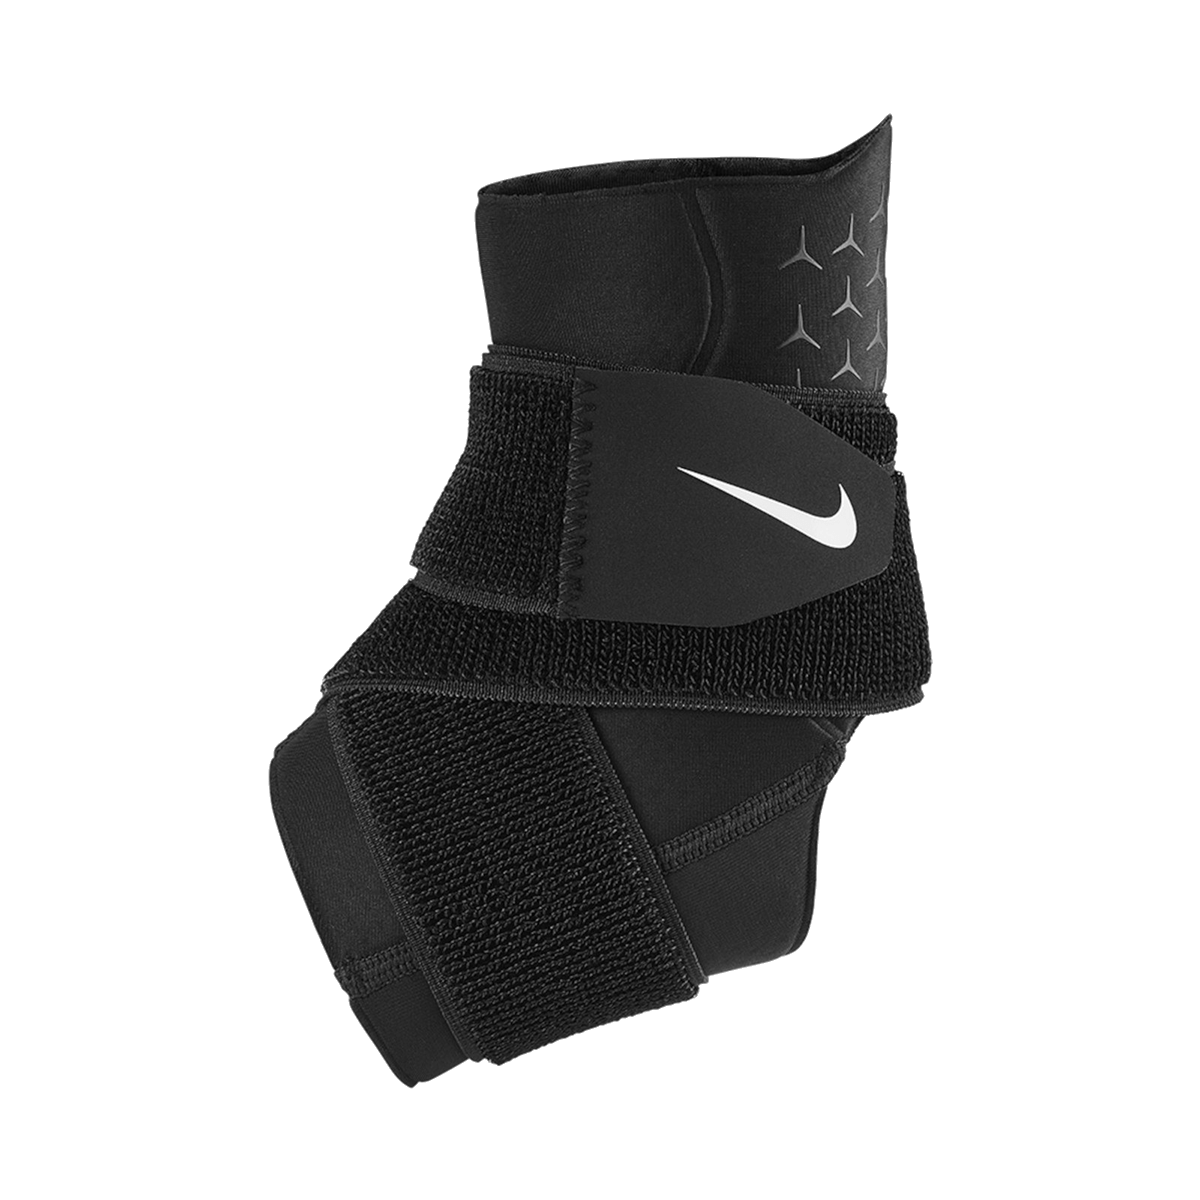 NIKE PRO ANKLE SLEEVE WITH STRAP BLACK/W Ankle imagine noua